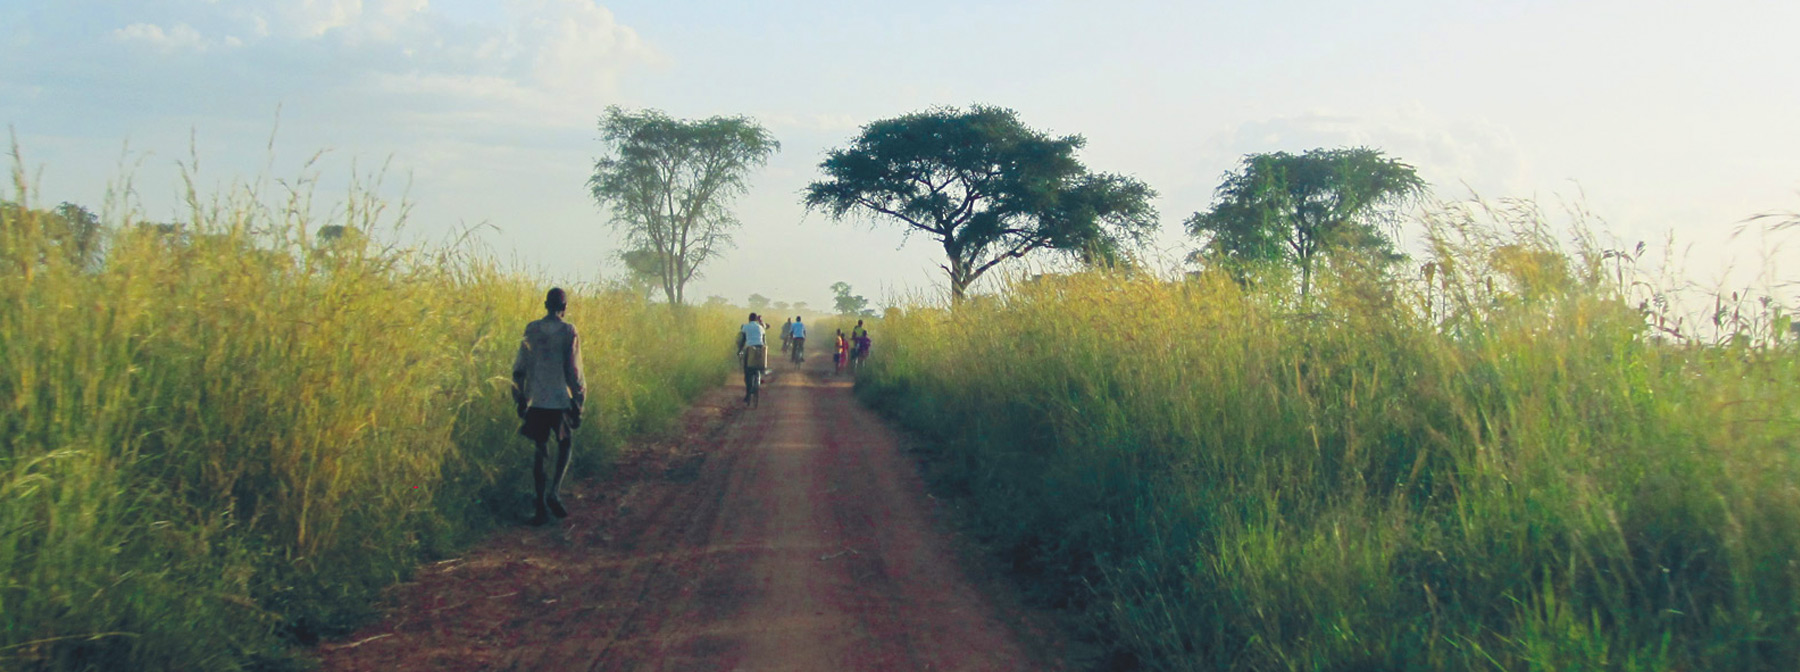 African villagers walking on a dirt road surrounded by tall green grass